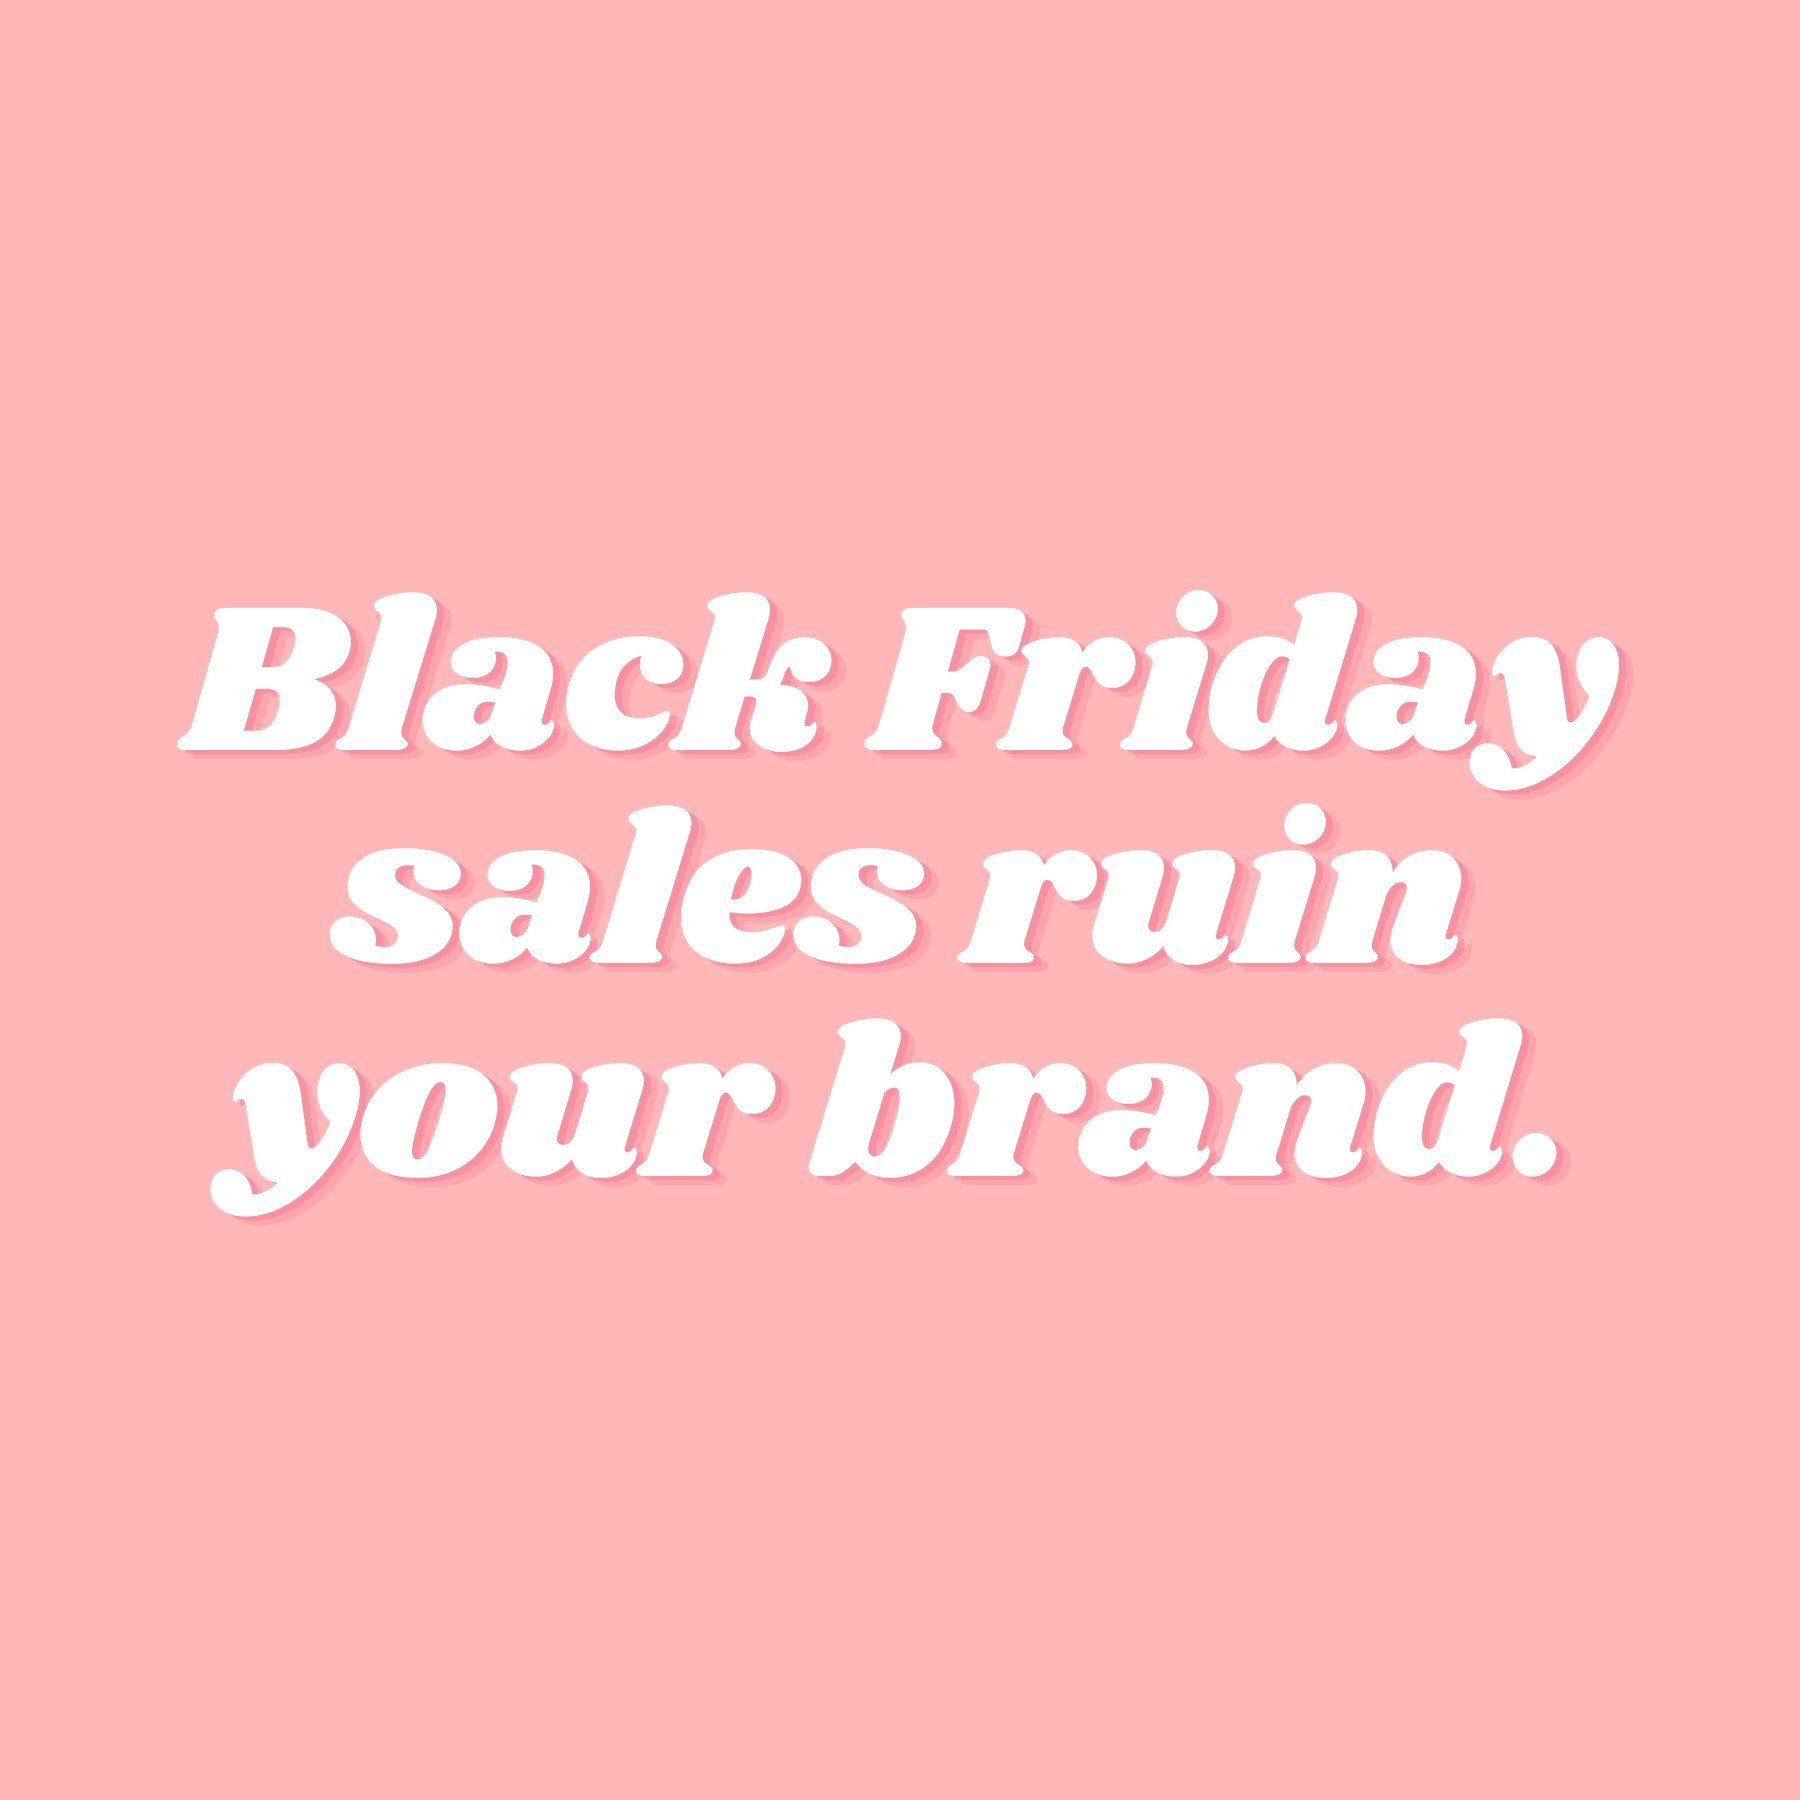 Running a Black Friday sale can ruin your slow fashion brand and impact your growth.